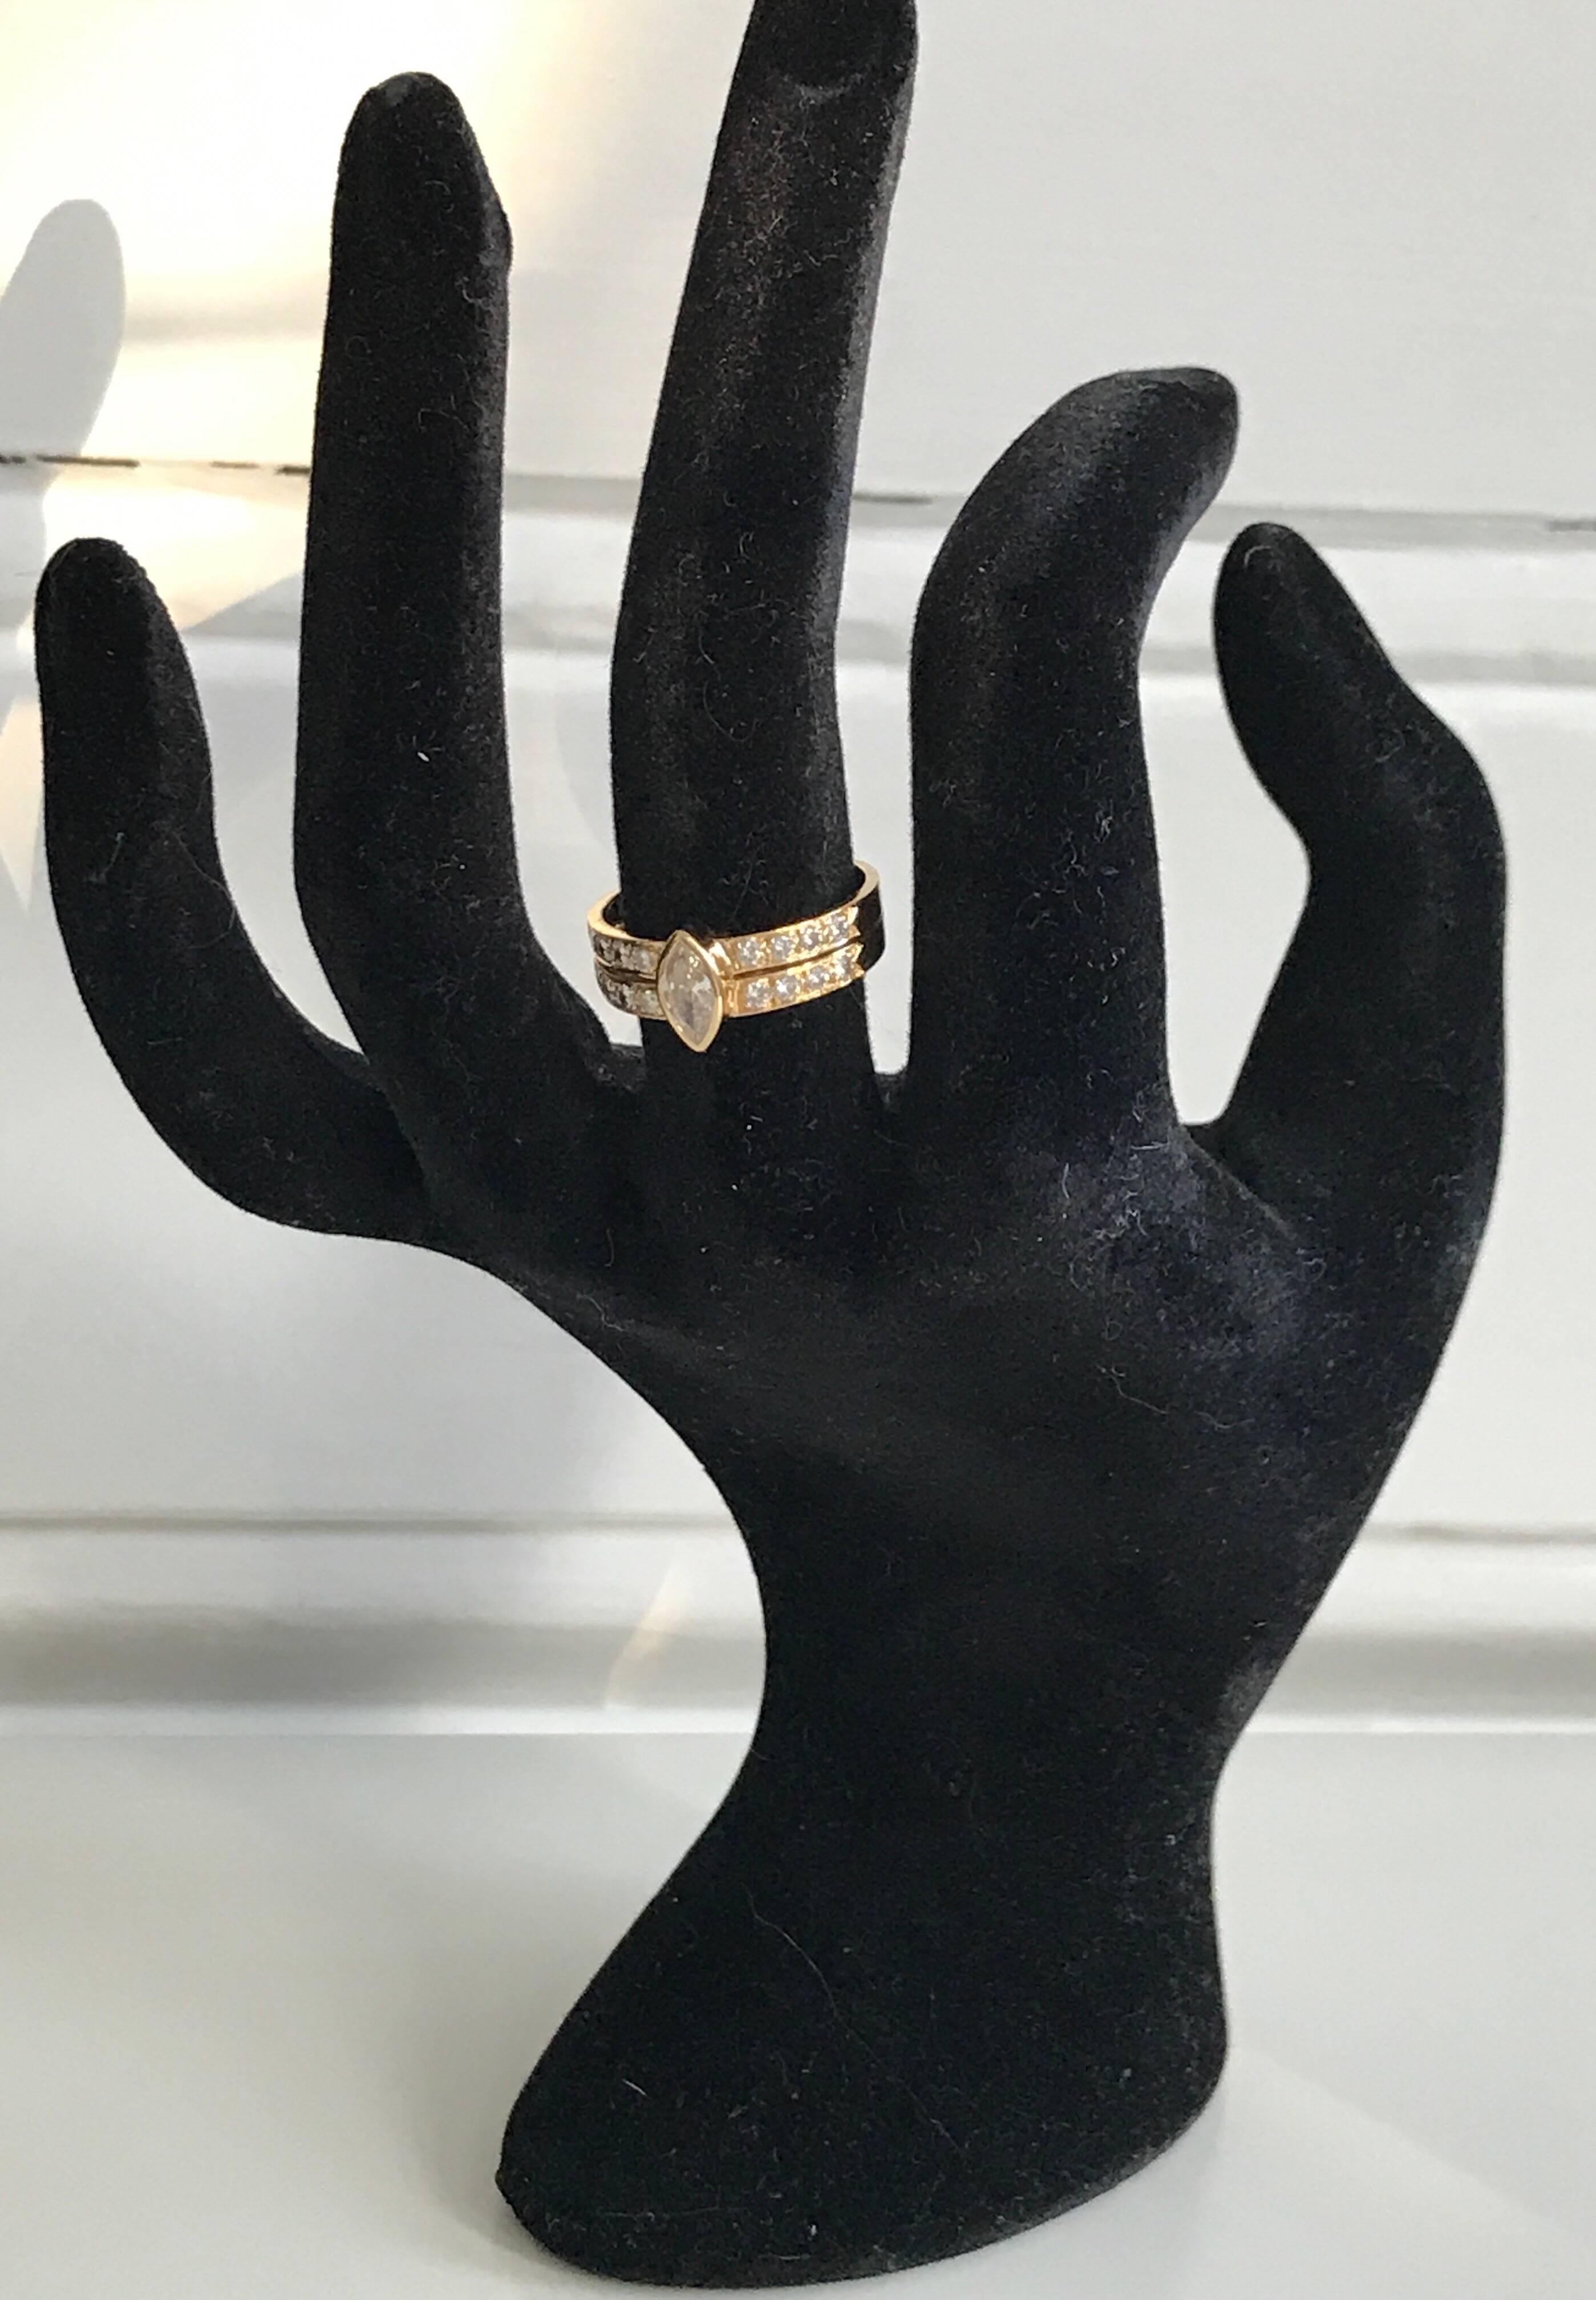 A vintage Cartier diamond ring set in 18k yellow gold. The ring features a centre marquise diamond of approx 0.20 carat set to a half-diamond band with 16 brilliant-cut round diamonds of approx 0.32 carat
Ring size: UK N, US 6 1/2 , EU